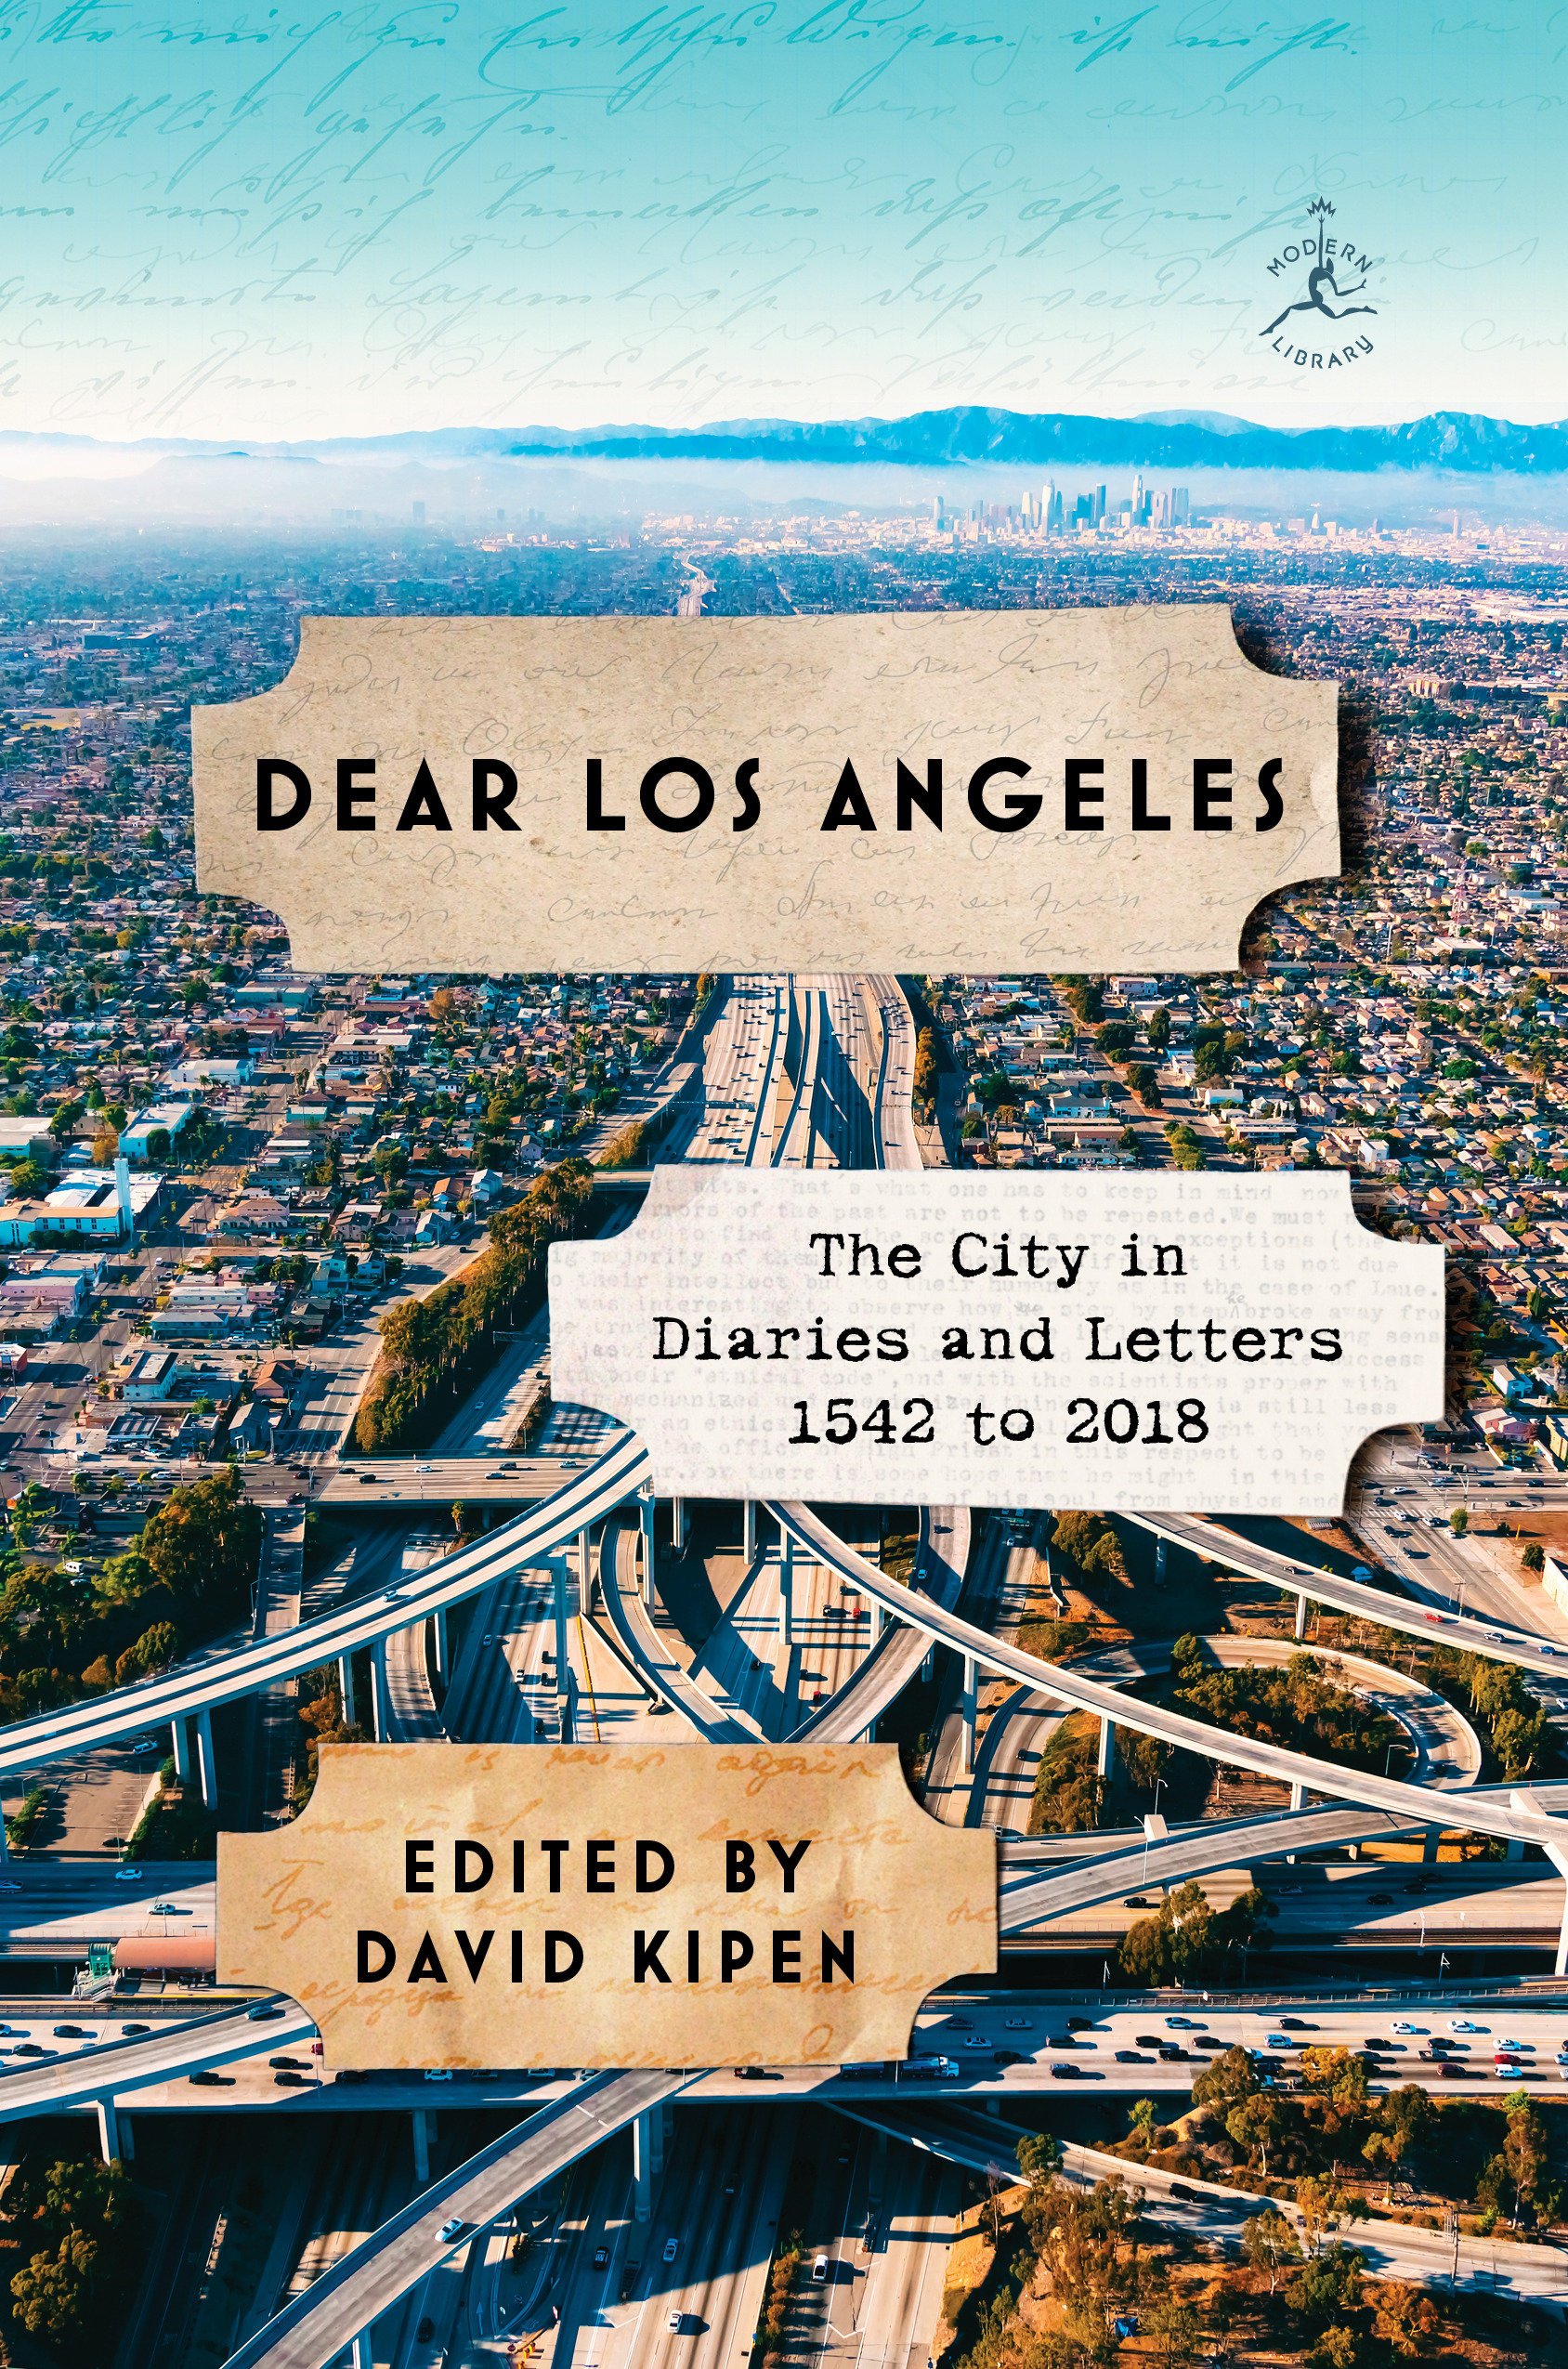 Dear Los Angeles: The City in Diaries and Letters, 1542 to 2018 (Modern Library)